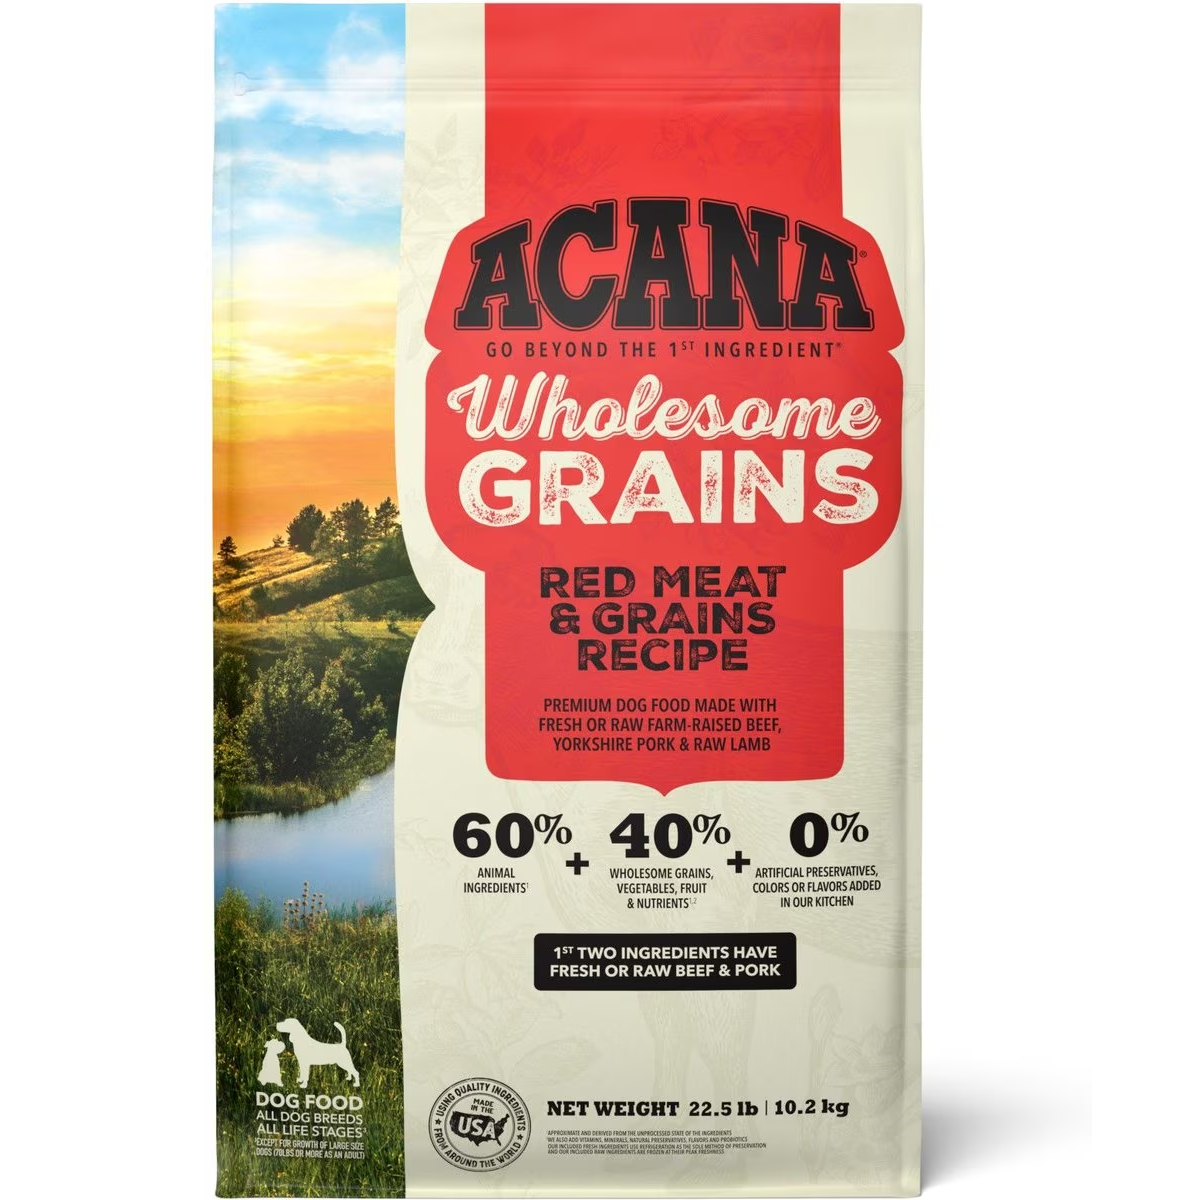 Acana Wholesome Grains Dry Dog Food new